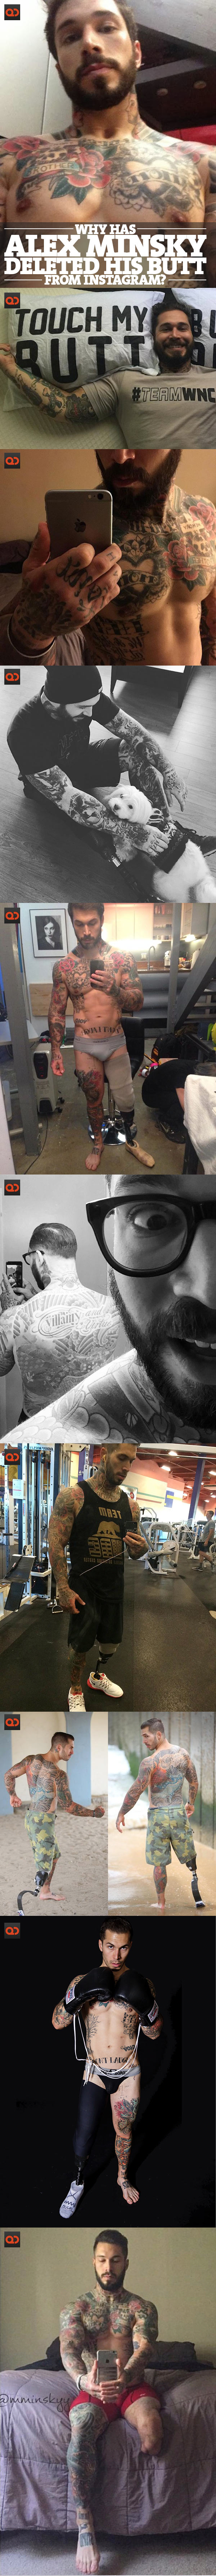 qc-why_did_alex_minsky_deleted_his_butt_from_instagram-collage01